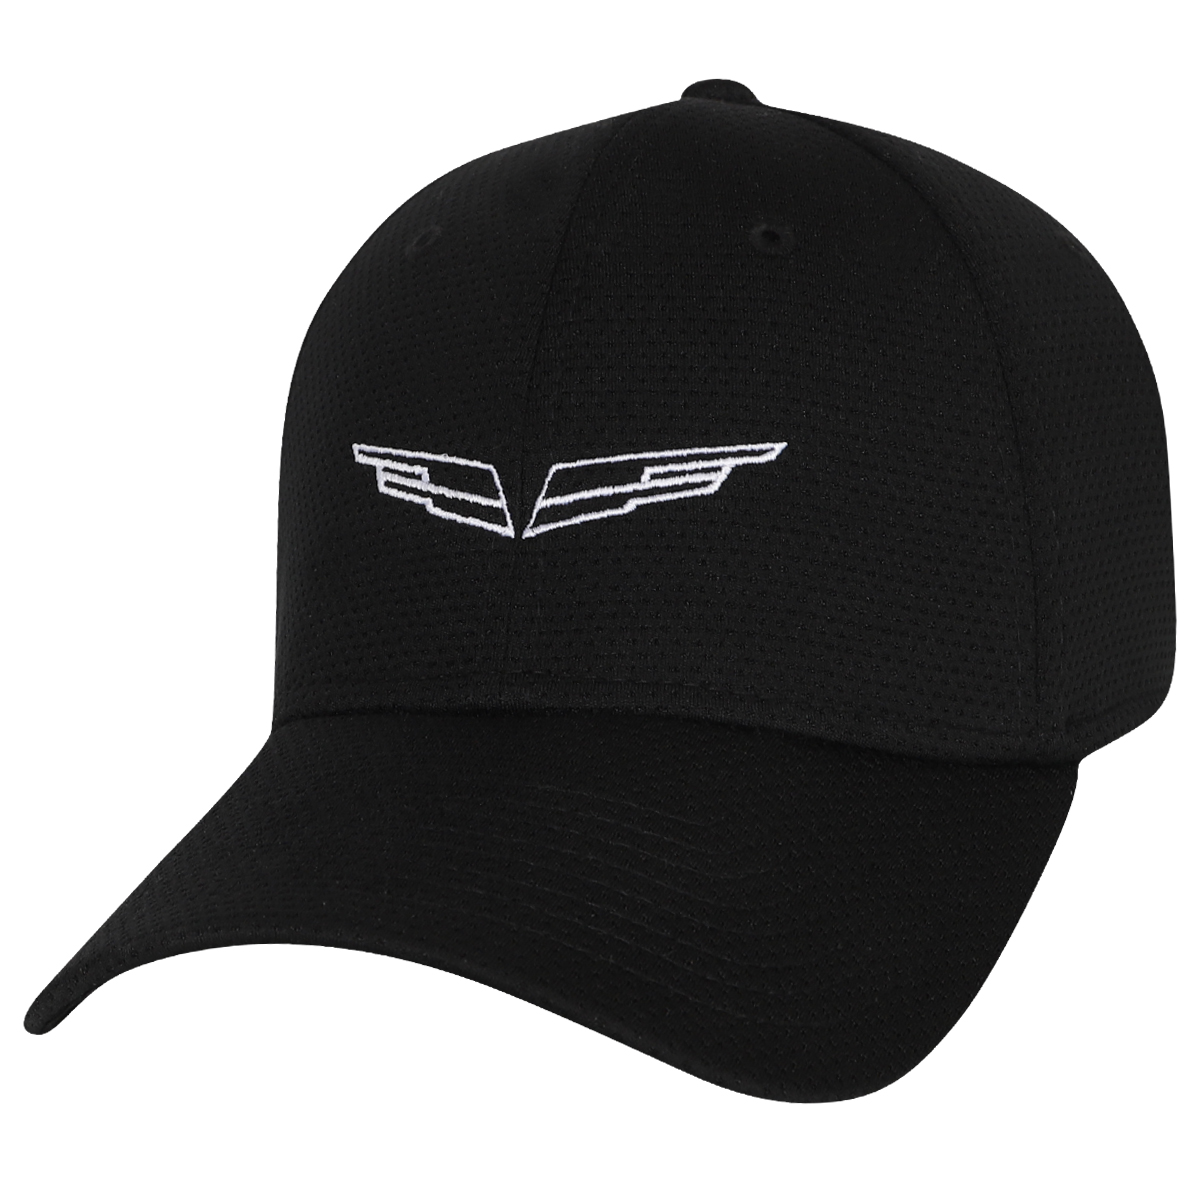 Blackwing Fitted Hat